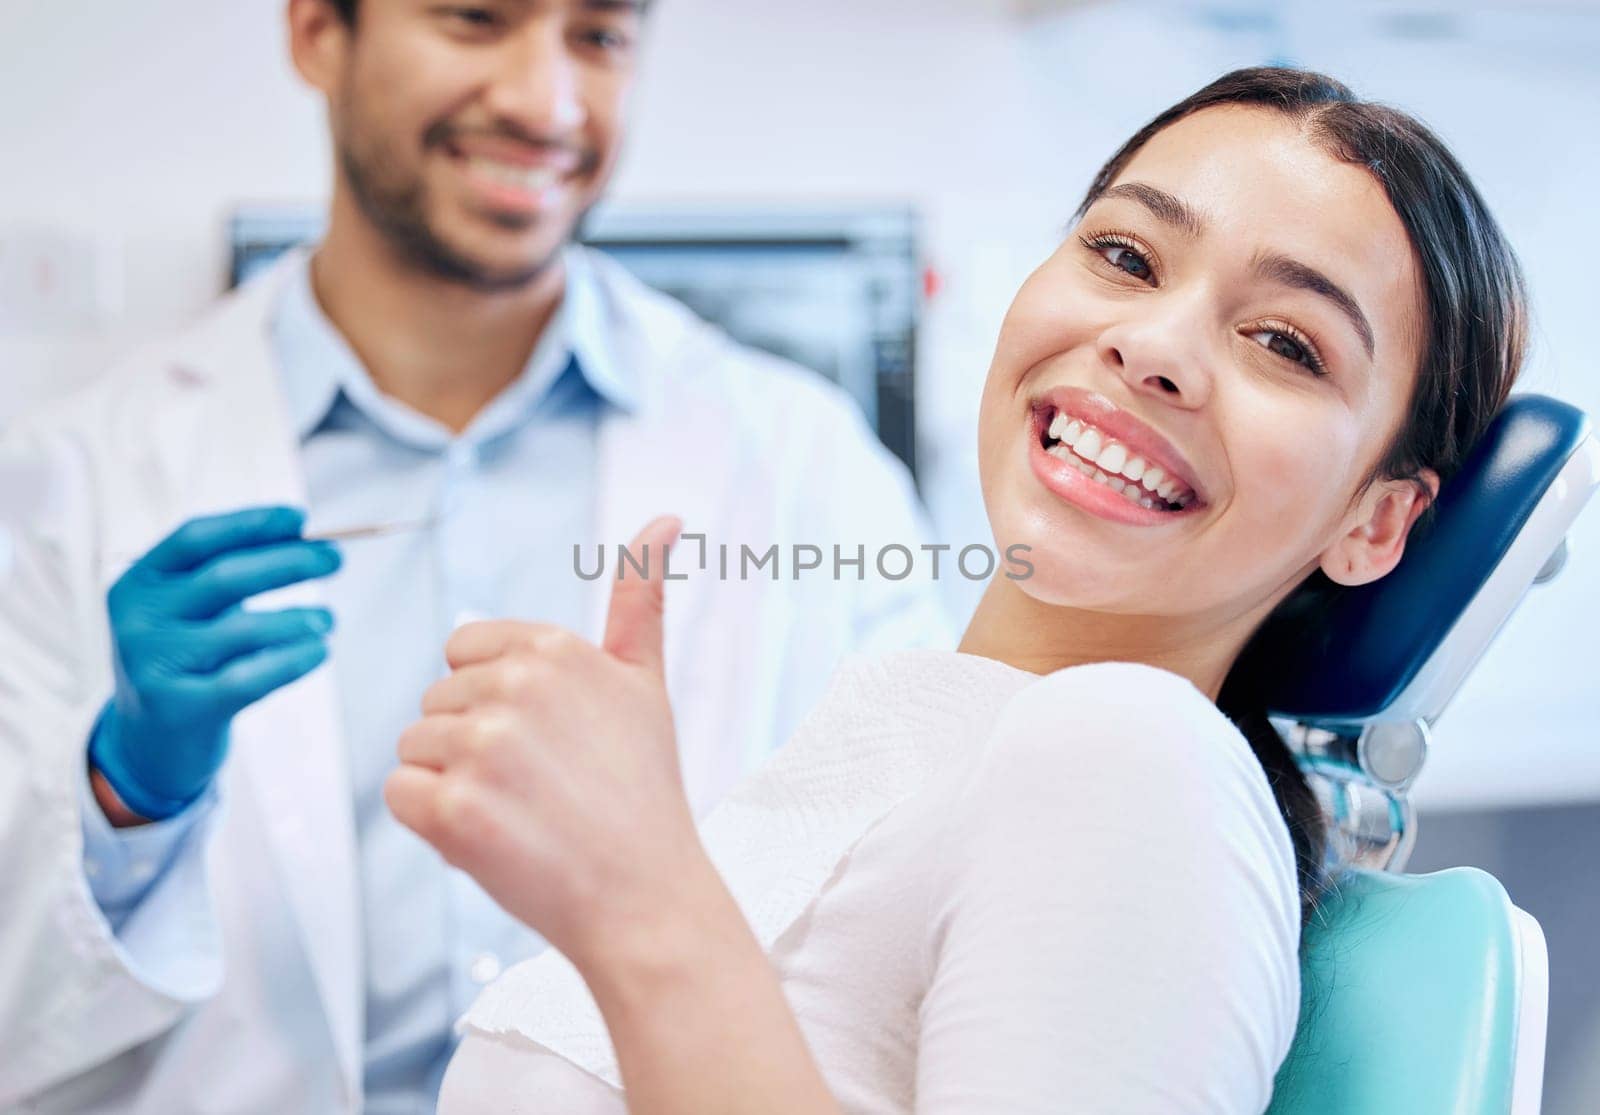 Happy, thumbs up and portrait of dentist and patient for teeth whitening, service and dental care. Healthcare, dentistry and hand sign of orthodontist and woman for oral hygiene, wellness or cleaning.